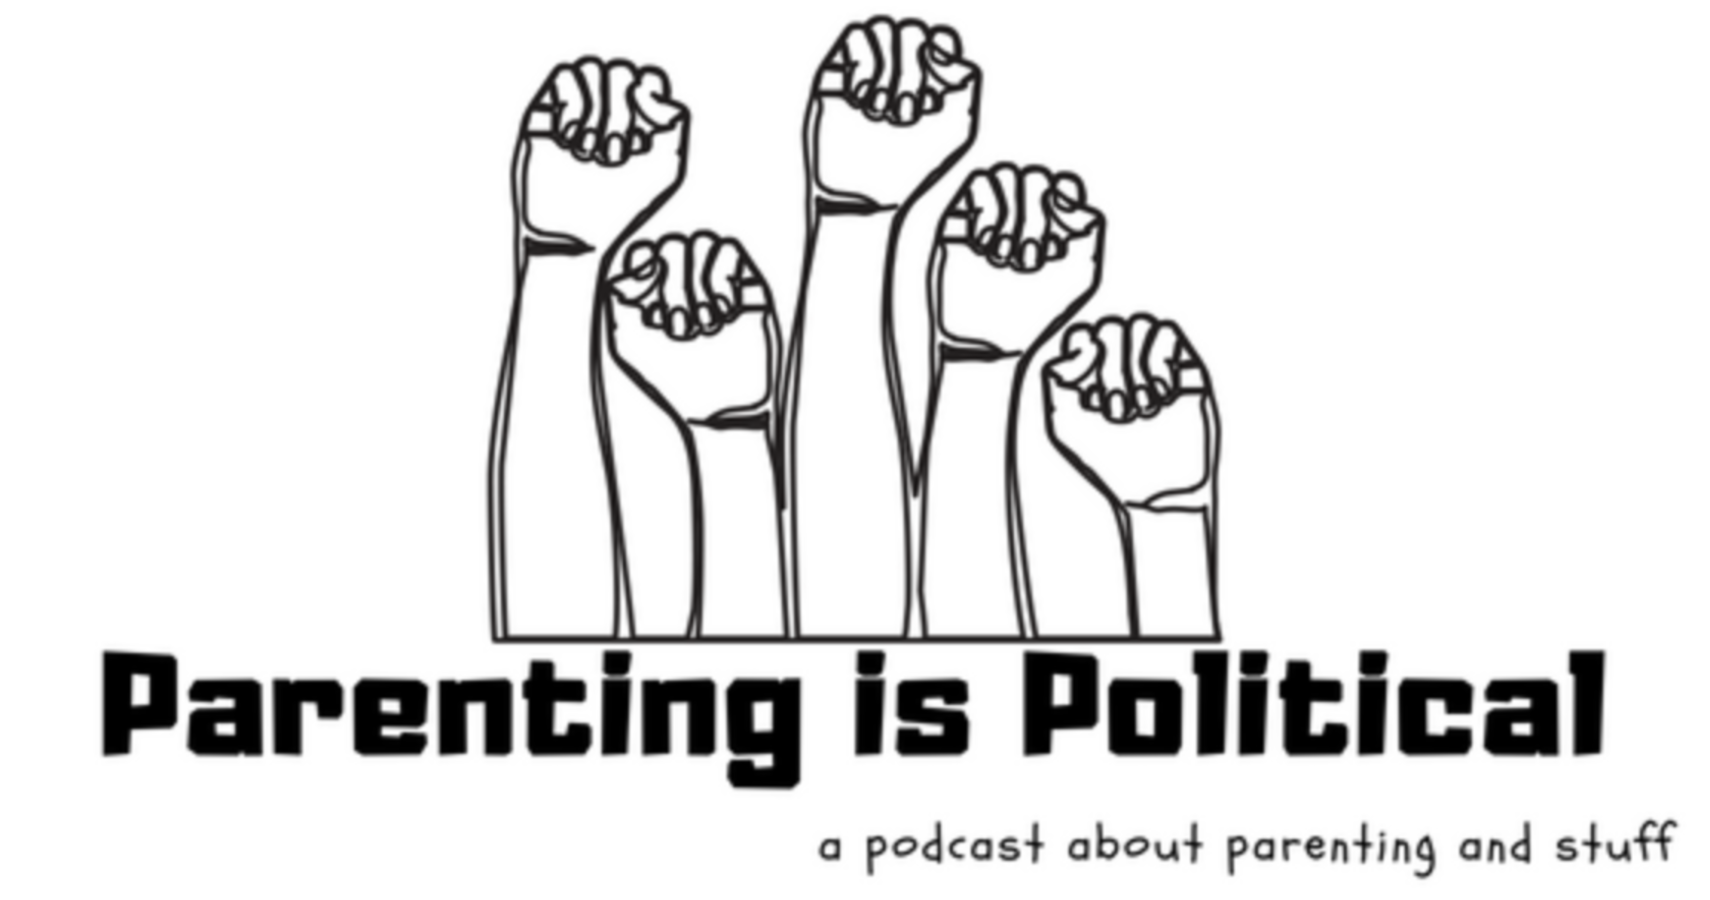 Parenting is political